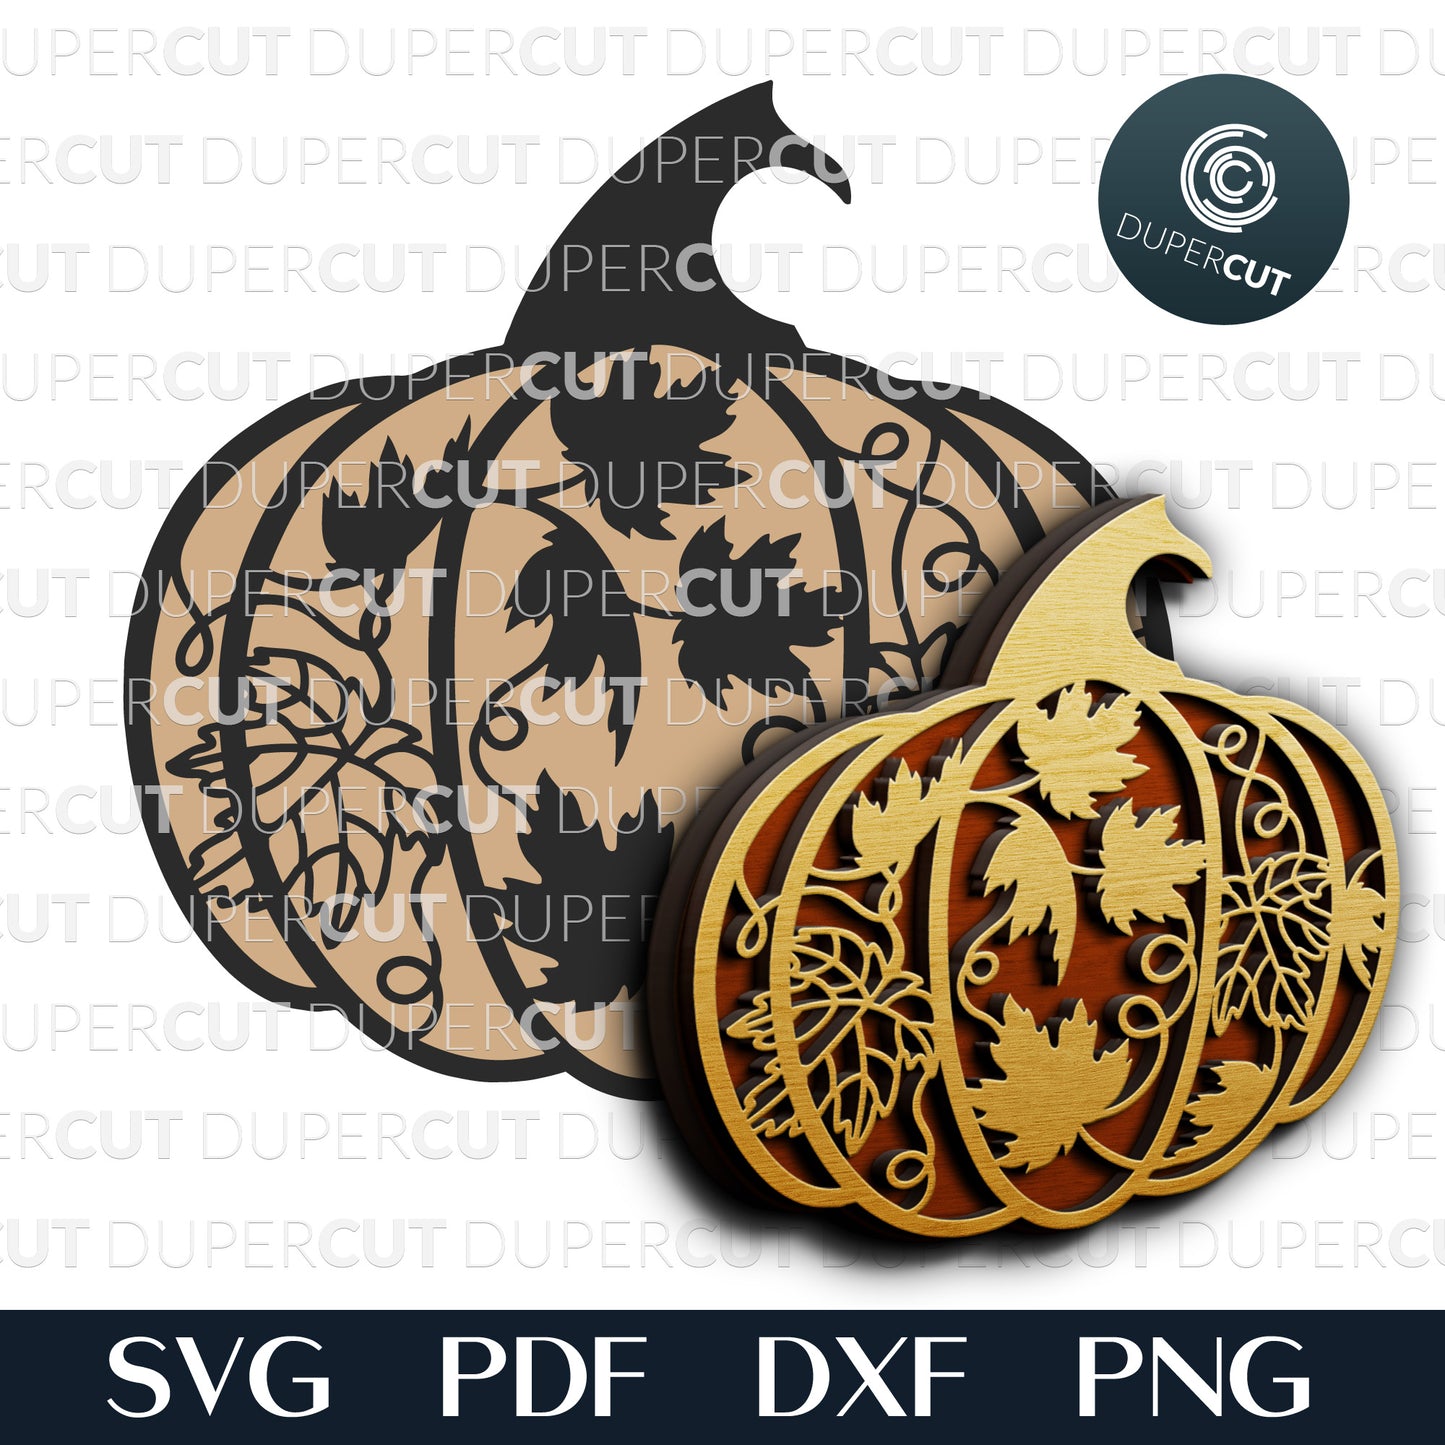 Autumn pumpkin with leaf pattern SVG PNG DXF layered laser cutting files for Glowforge, CNC plasma machines, Cricut, Silhouette by DuperCut